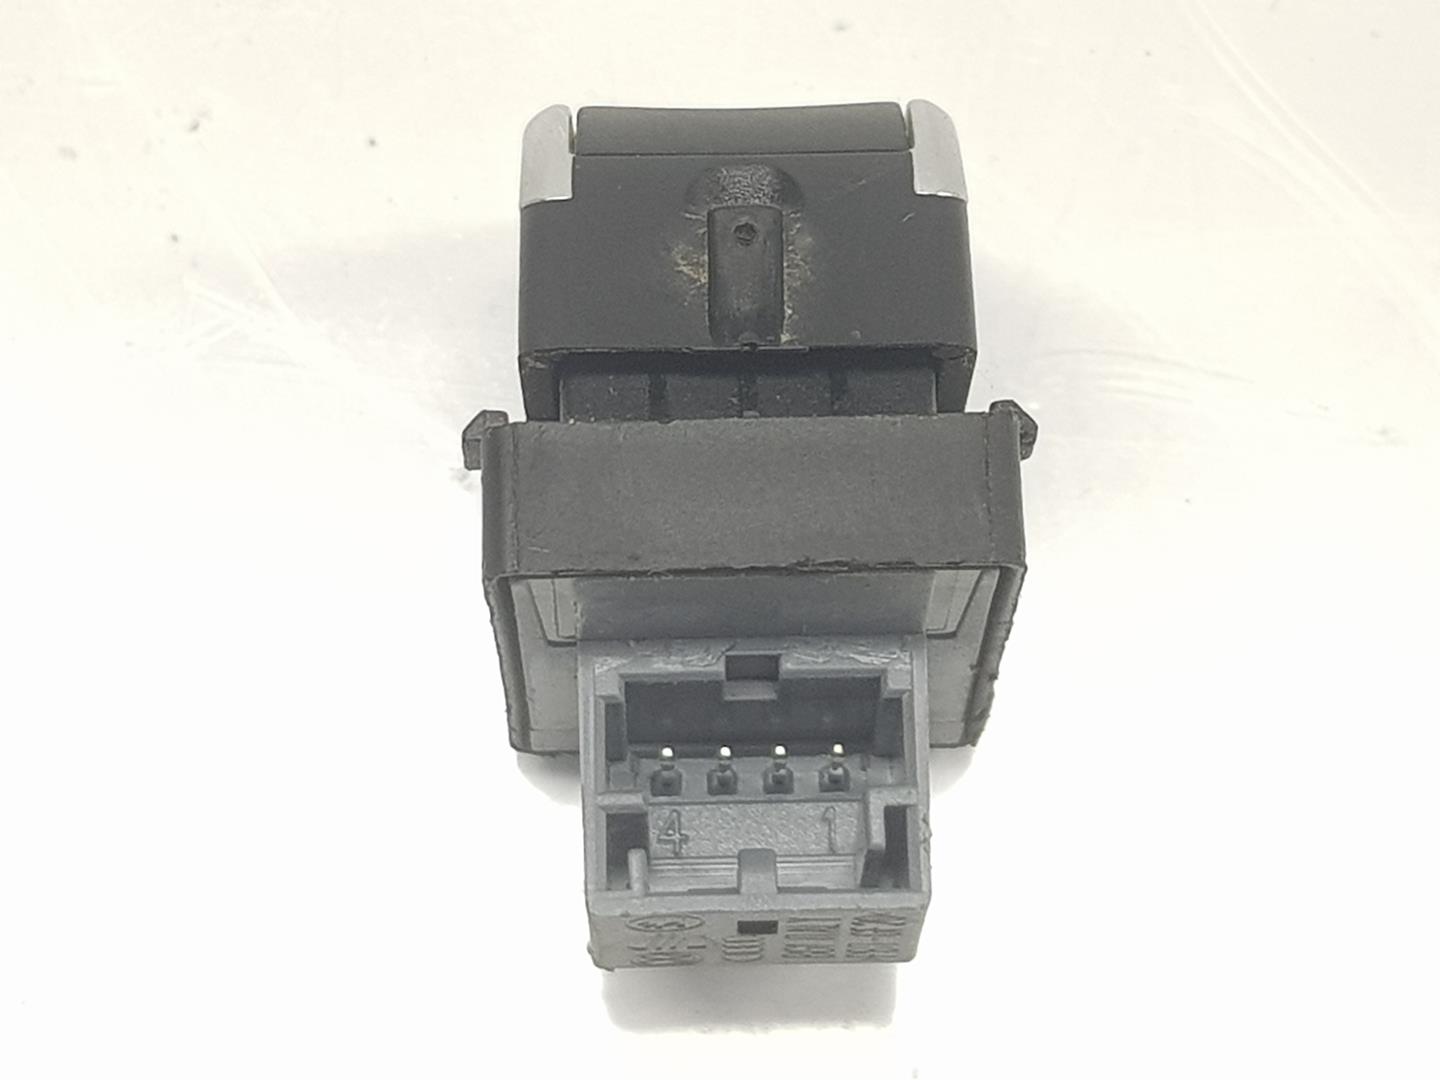 AUDI A7 C7/4G (2010-2020) Rear Right Door Window Control Switch 4H0959855A, 4H0959855A 19803832